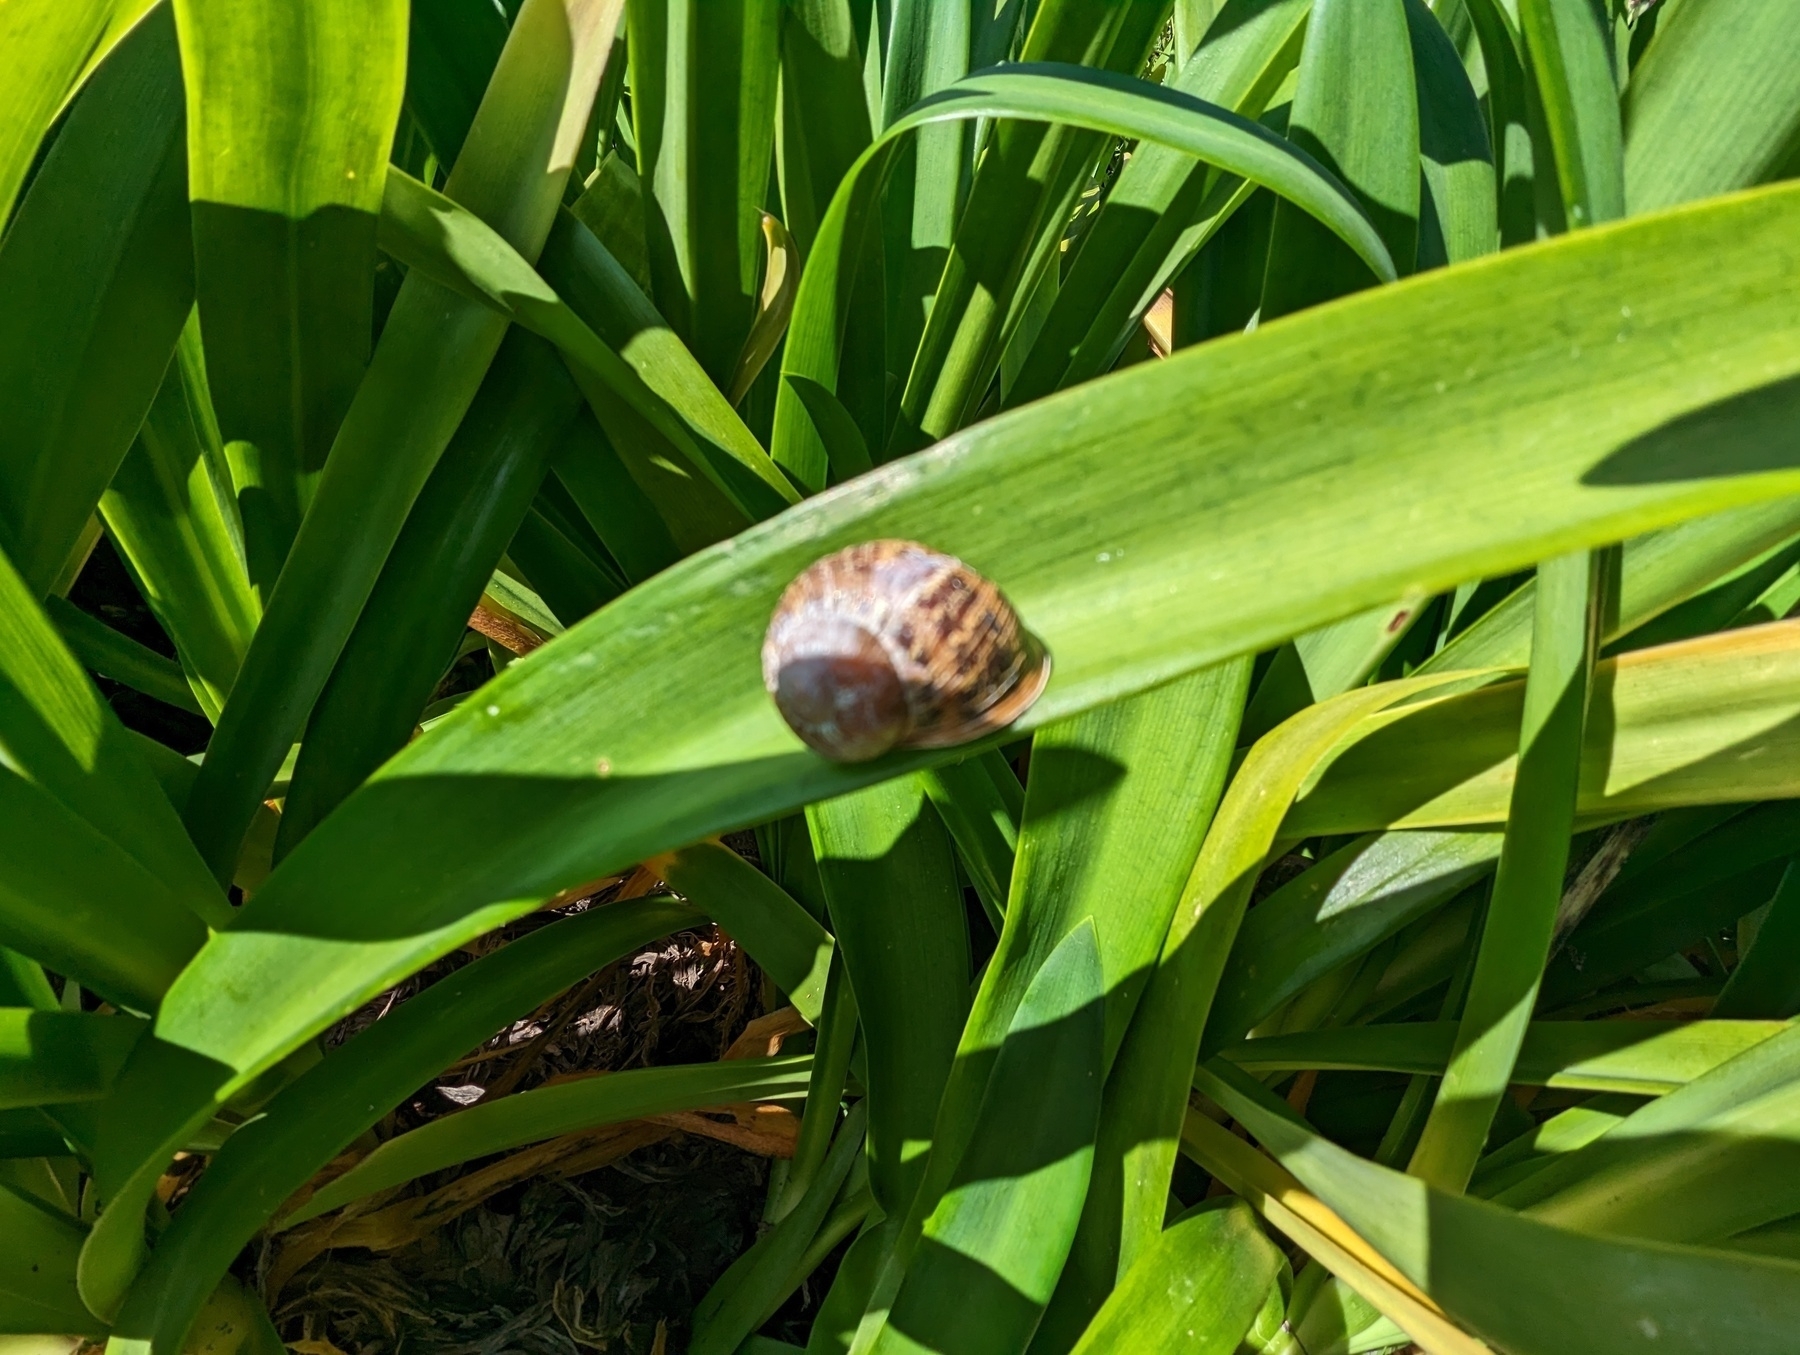 A retreat and a slight pullback to see a snail's striped brown shell slight out of focus but still atop a brilliant green leaf of a plant under sunlight Saturday, April 16th, 2023 at Cutting Boulevard and Elm Street in El Cerrito, California